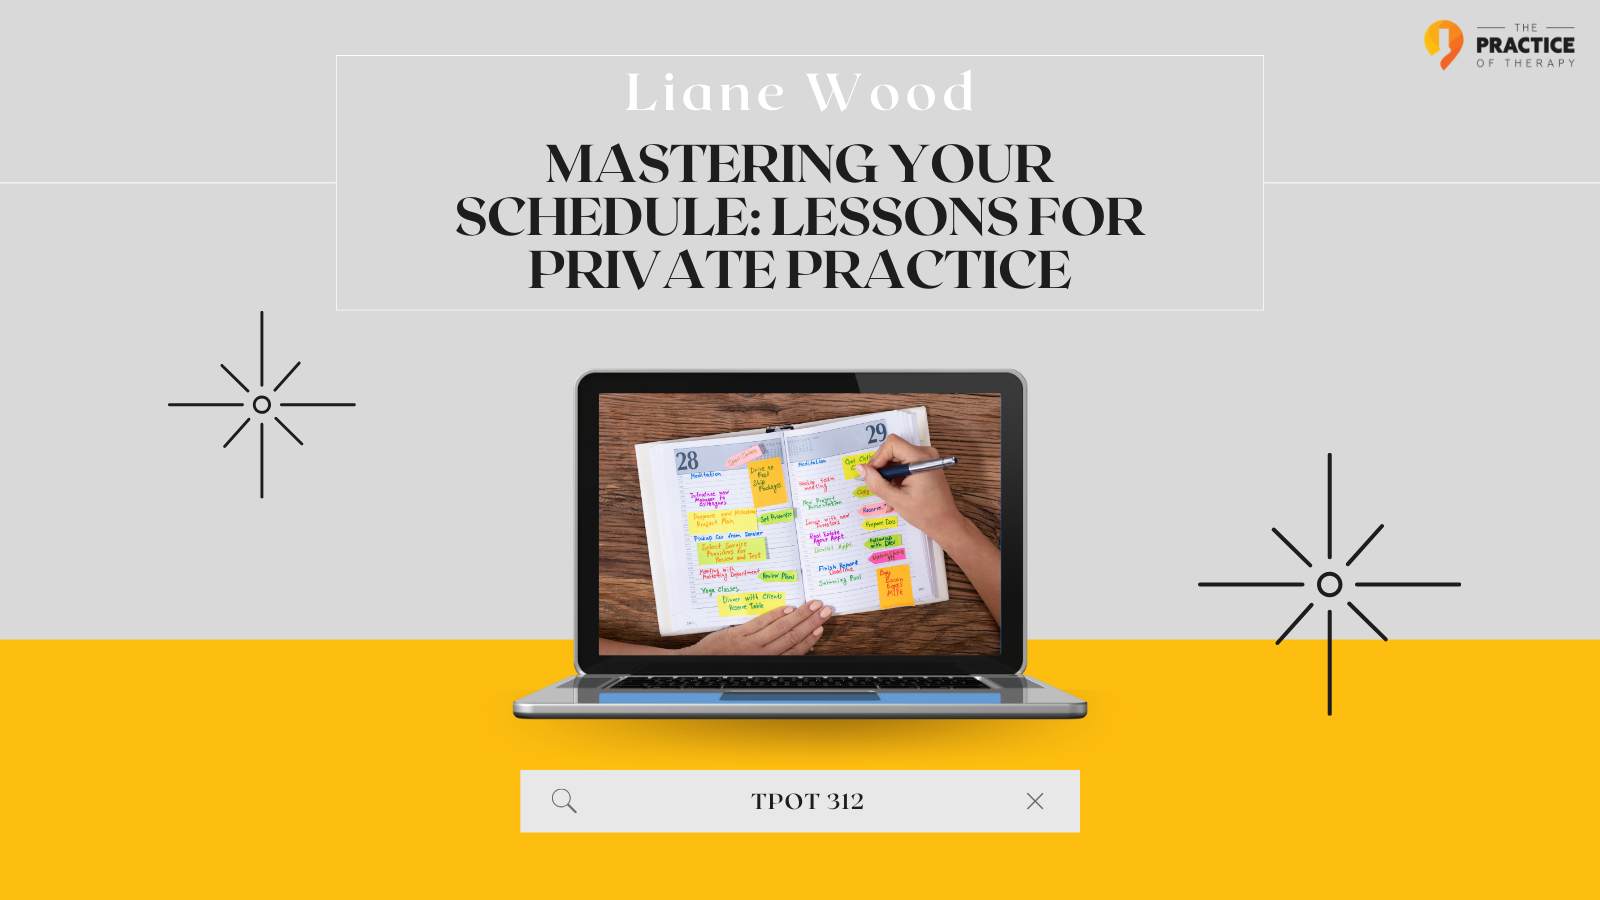 Liane Wood Mastering Your Schedule Lessons for Private Practice TPOT 312